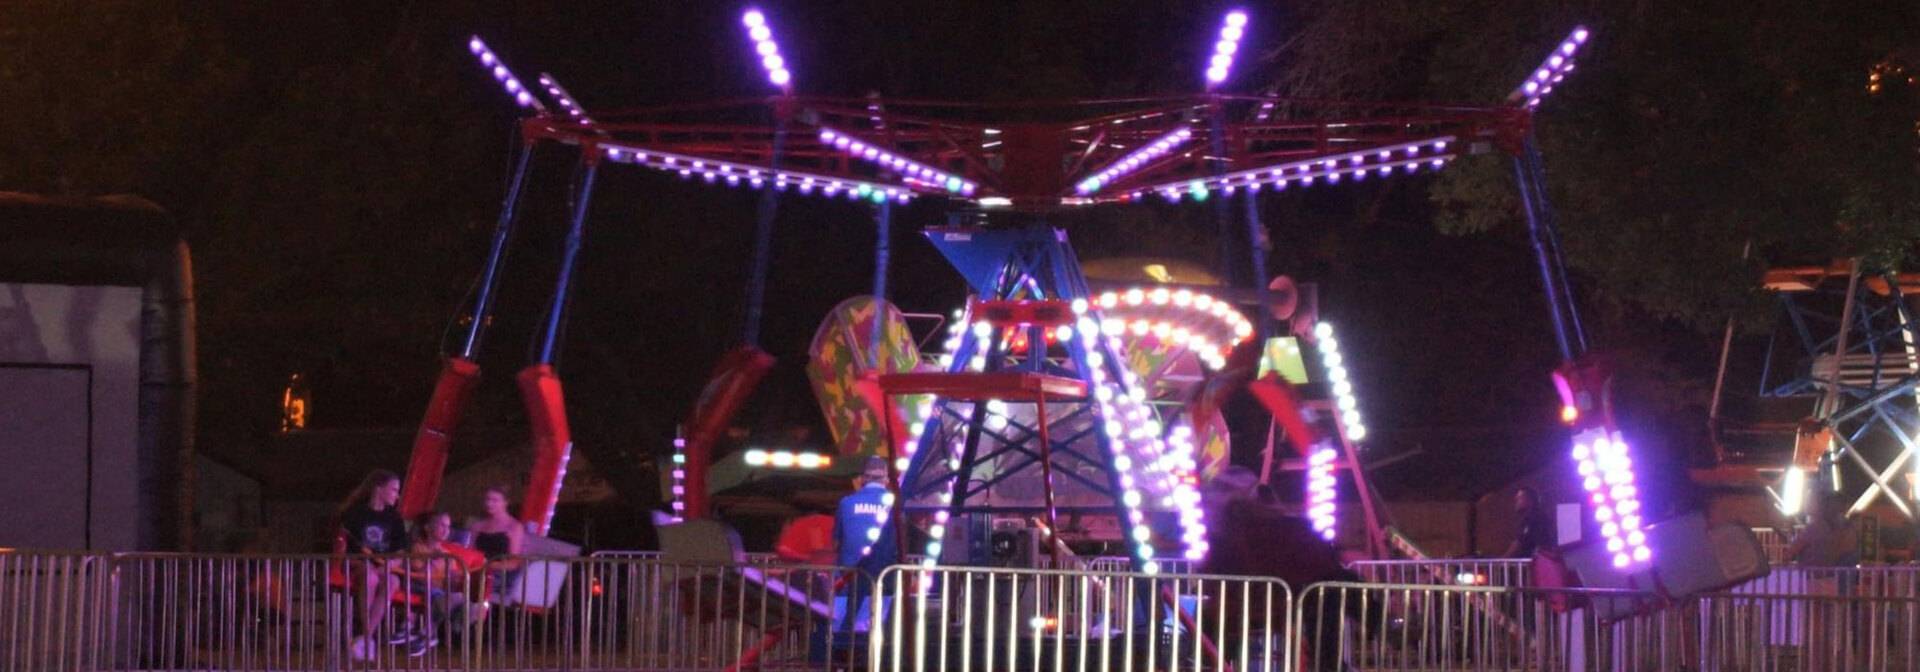 Carnival ride lit up at night at the Madison County Fairgrounds